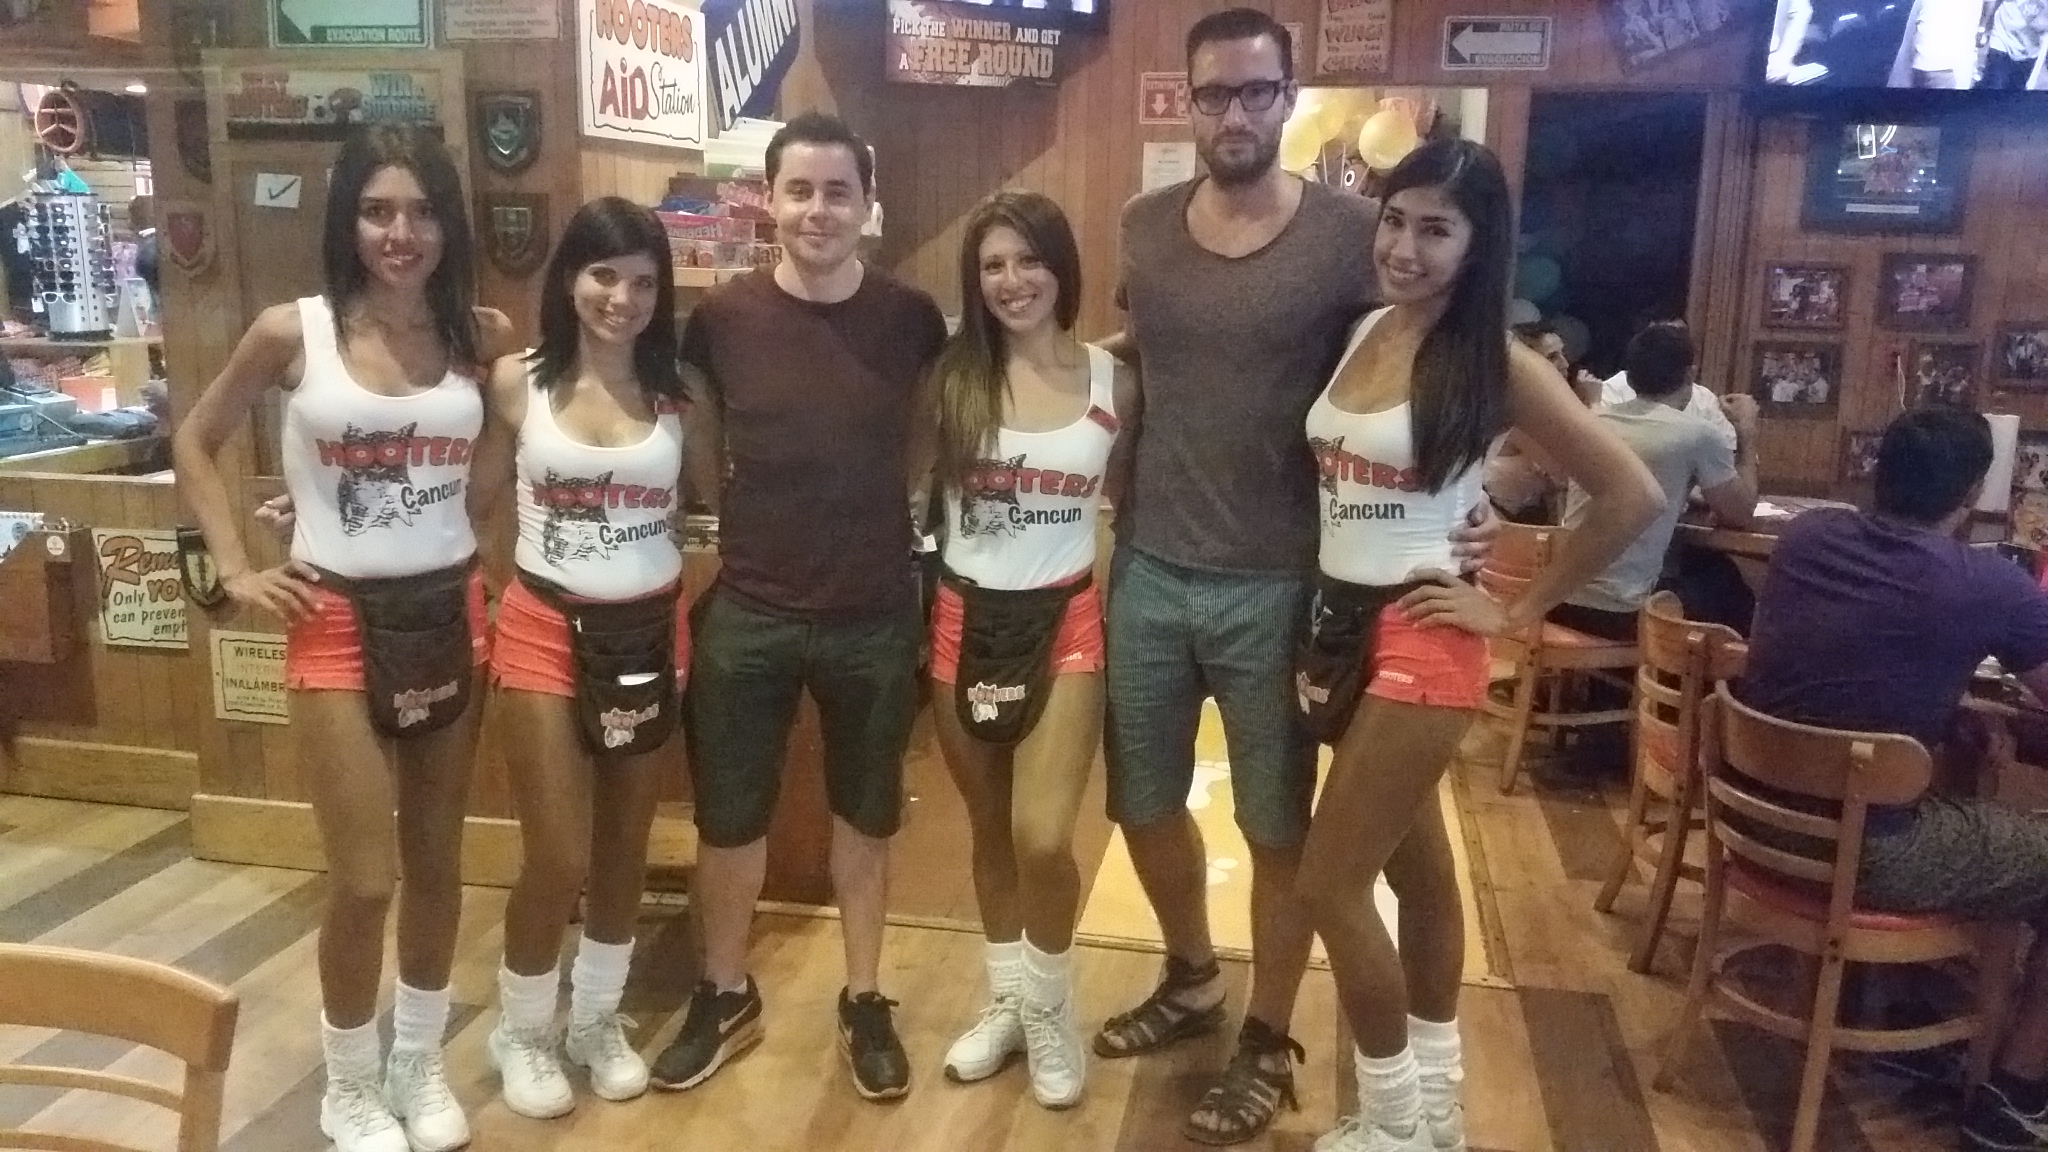 Hooters Cancun in Mexico is a great sports bar